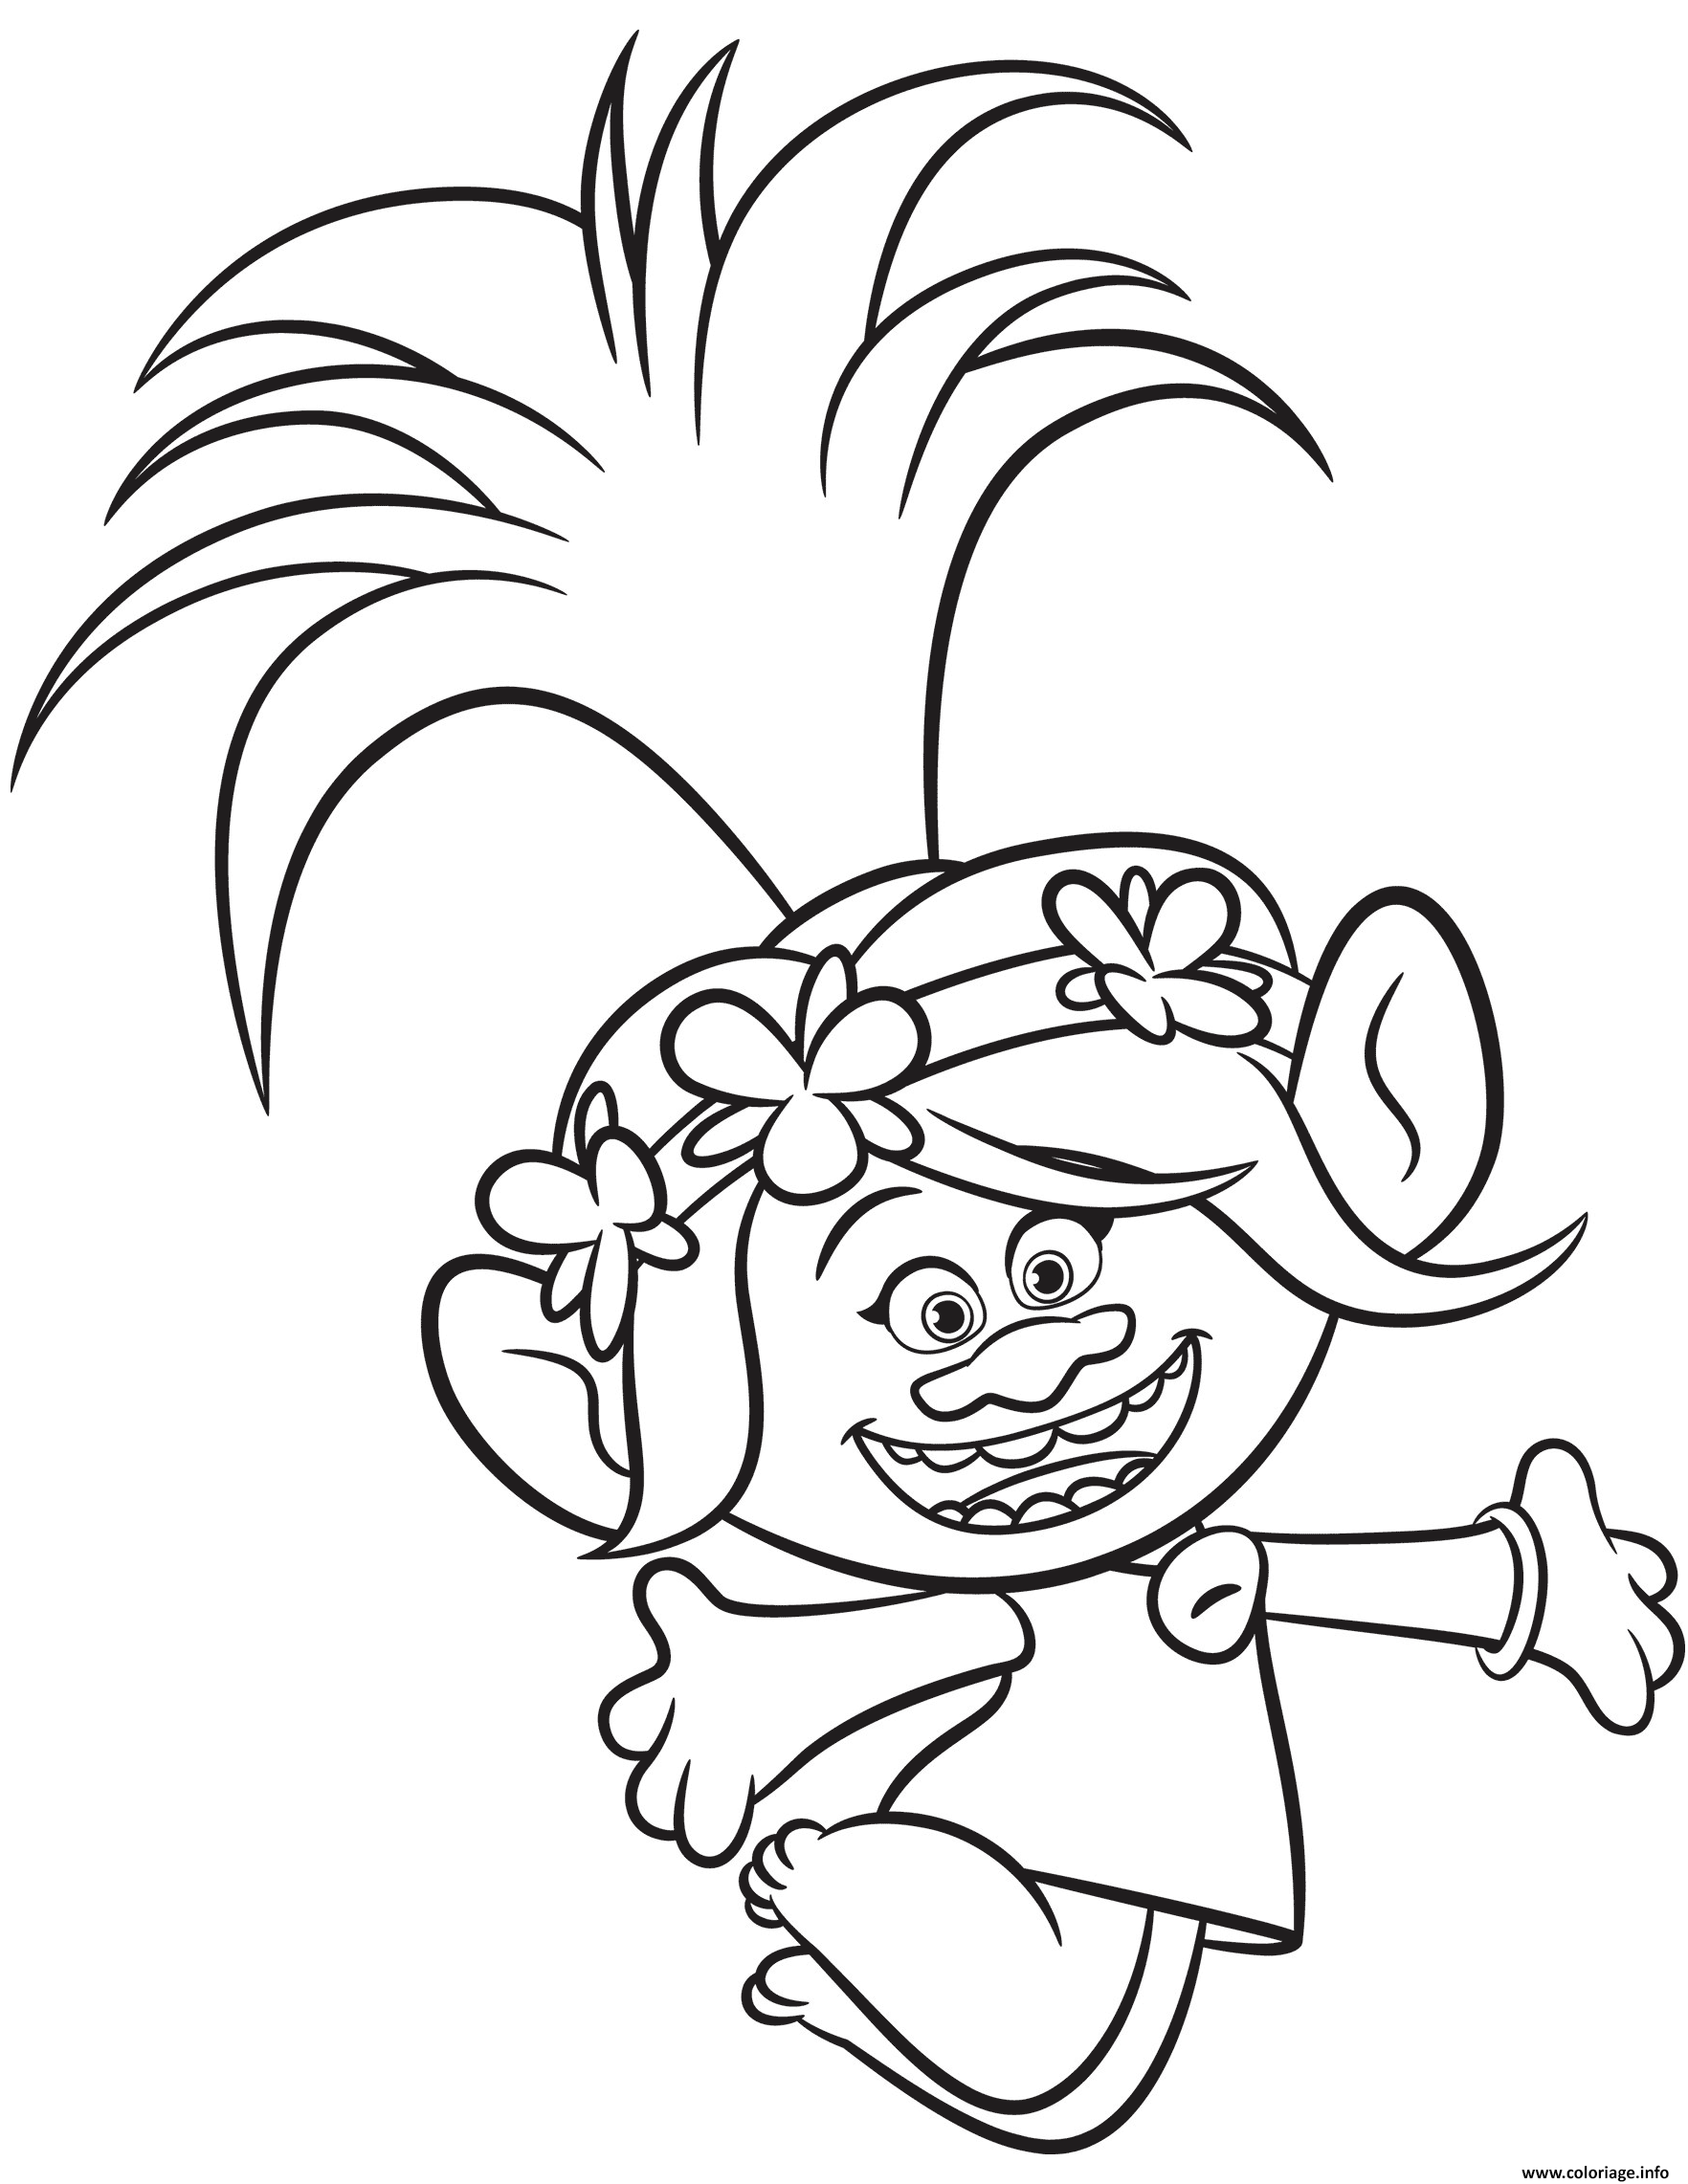 Coloriage Poppy From Trolls 2 Dessin   Imprimer